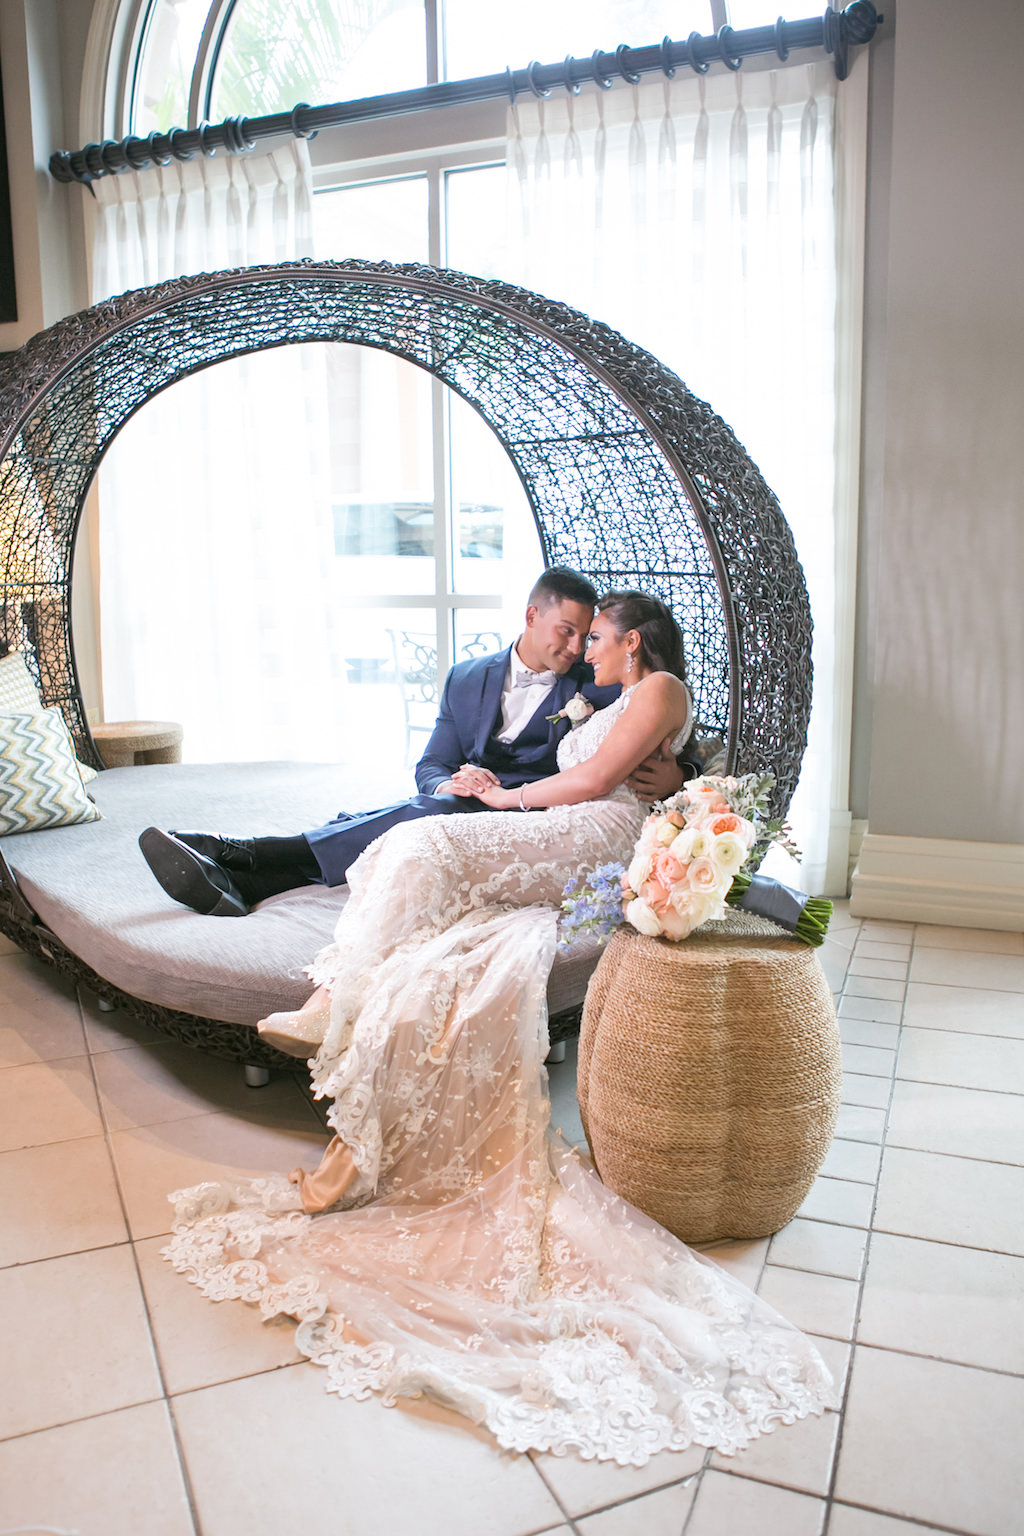 Florida Bride and Groom Wedding Portrait in Round Lounge Chair | Tampa Bay Photographer Carrie Wildes Photography | Hotel Wedding Venue Renaissance Tampa International Plaza